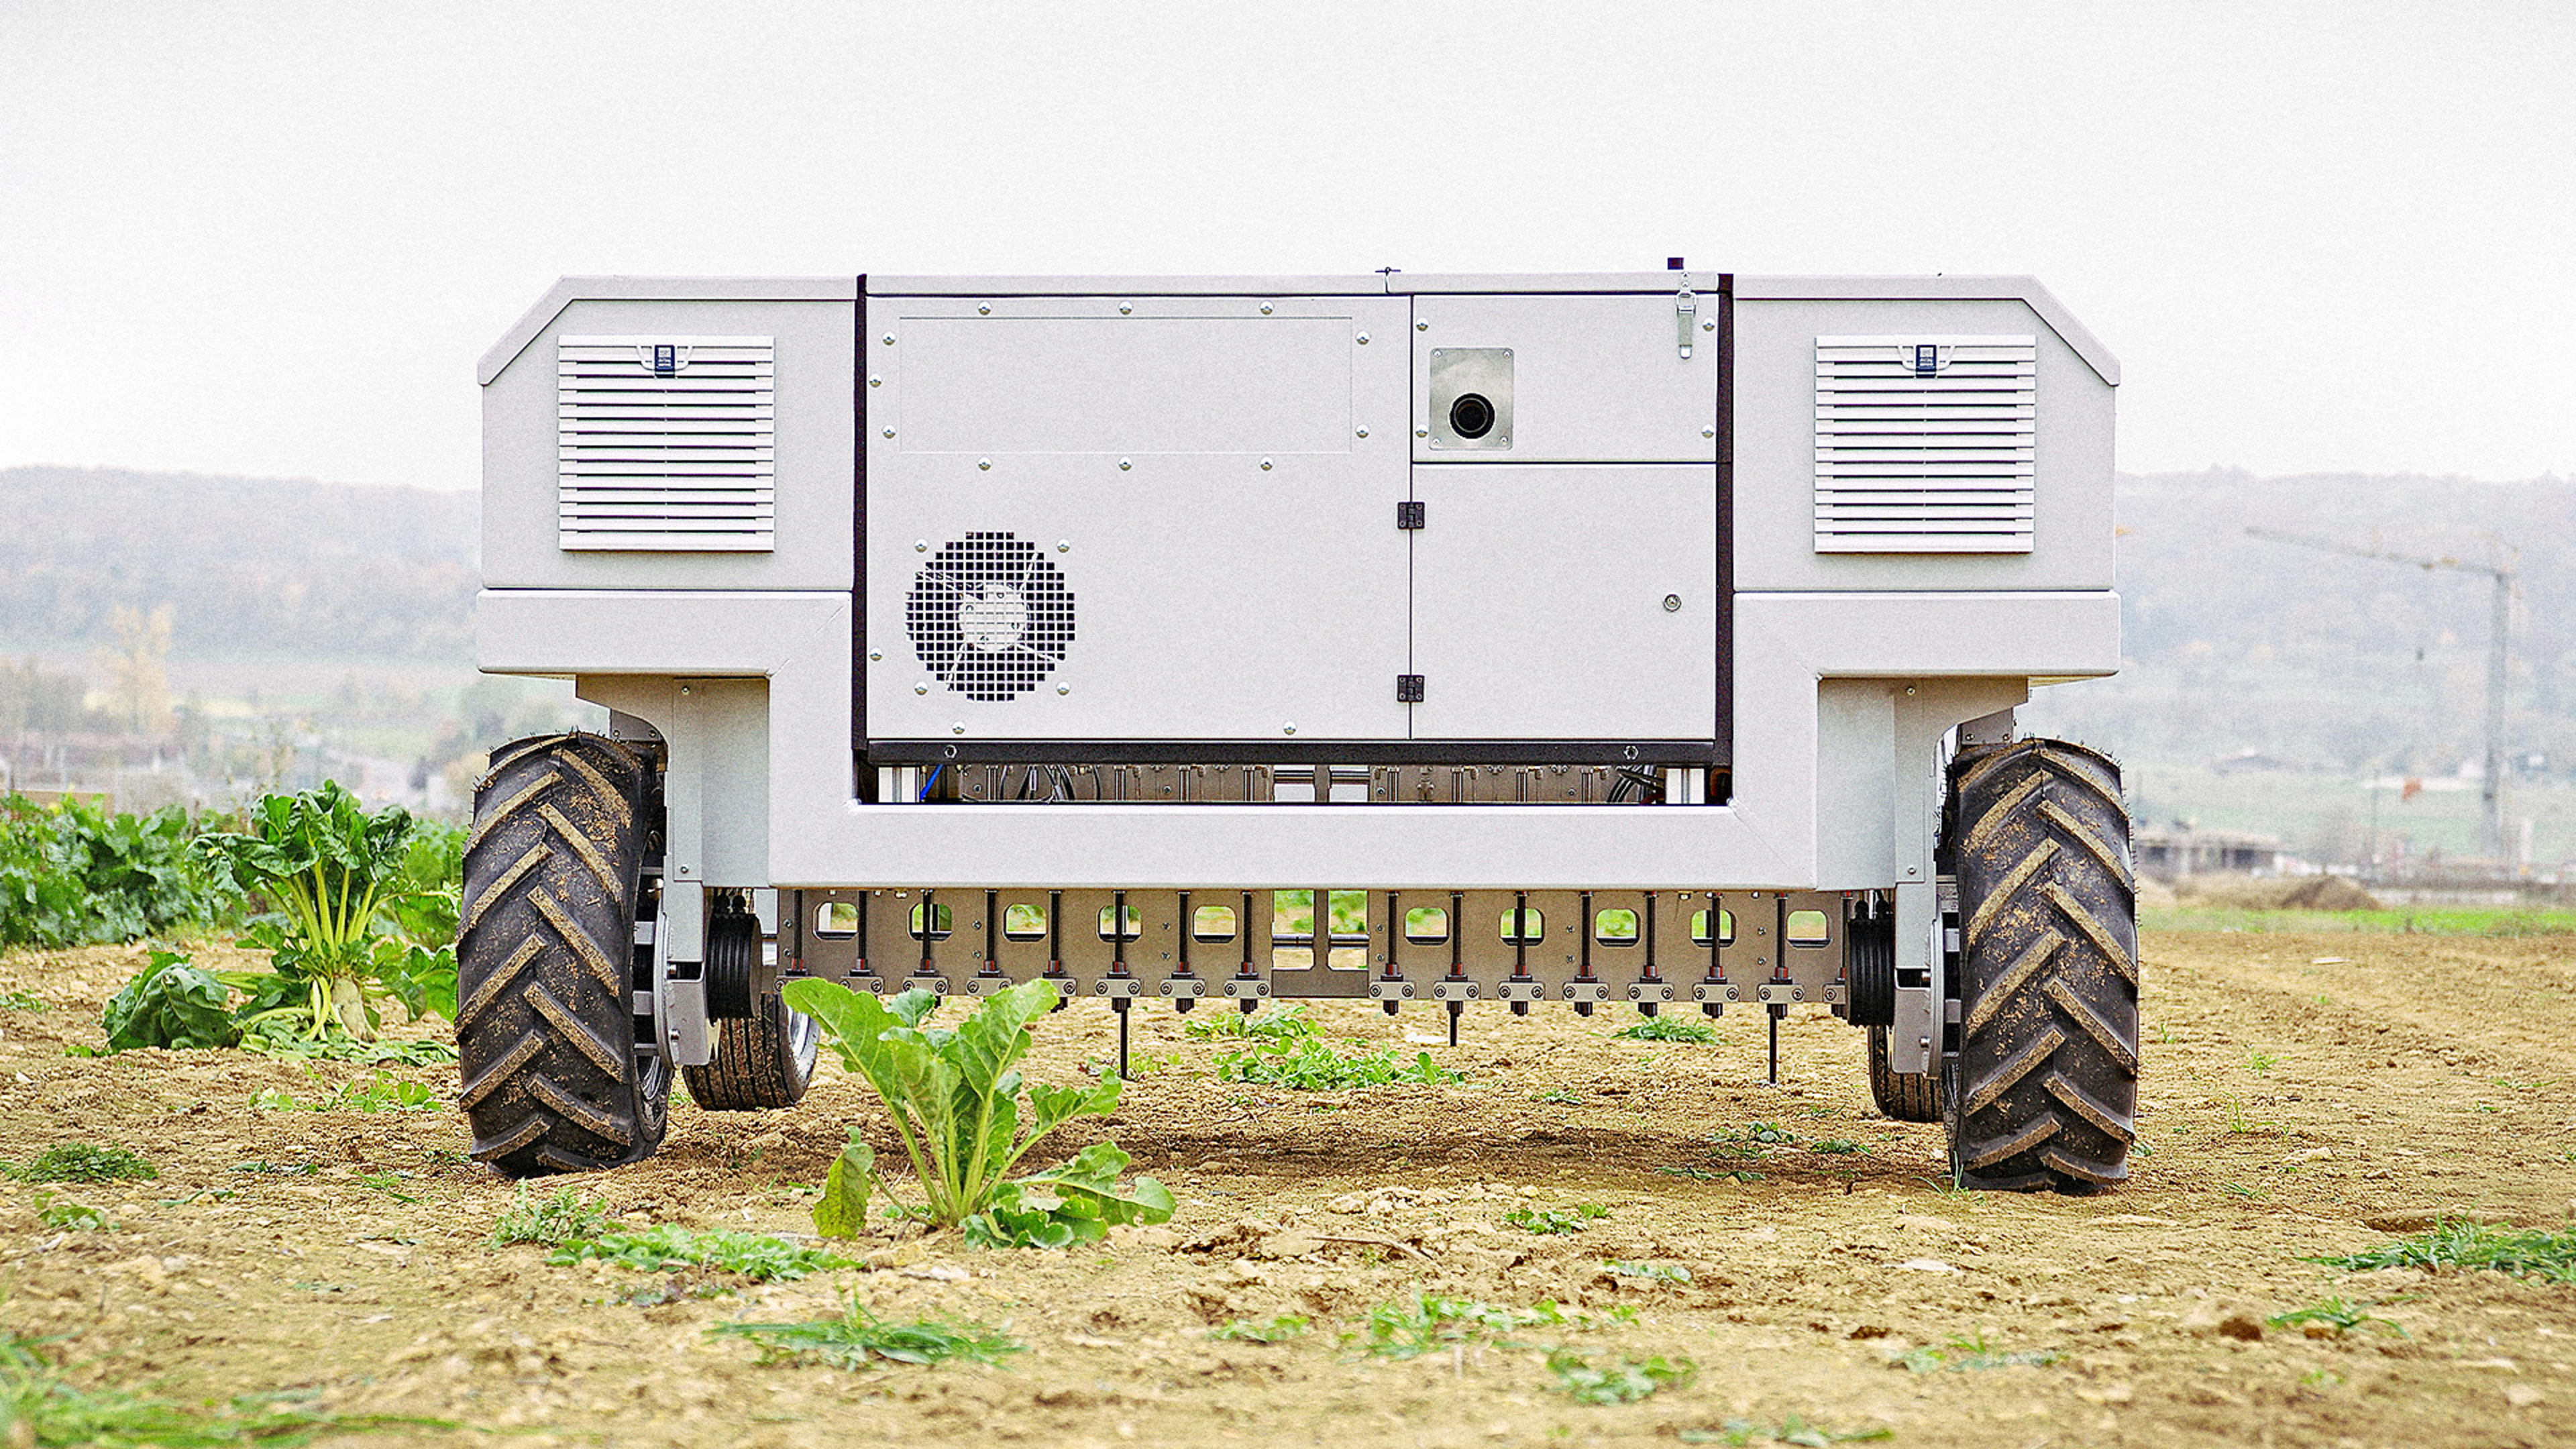 This Weed-Destroying Farm Robot Is Going To Replace Farm Workers